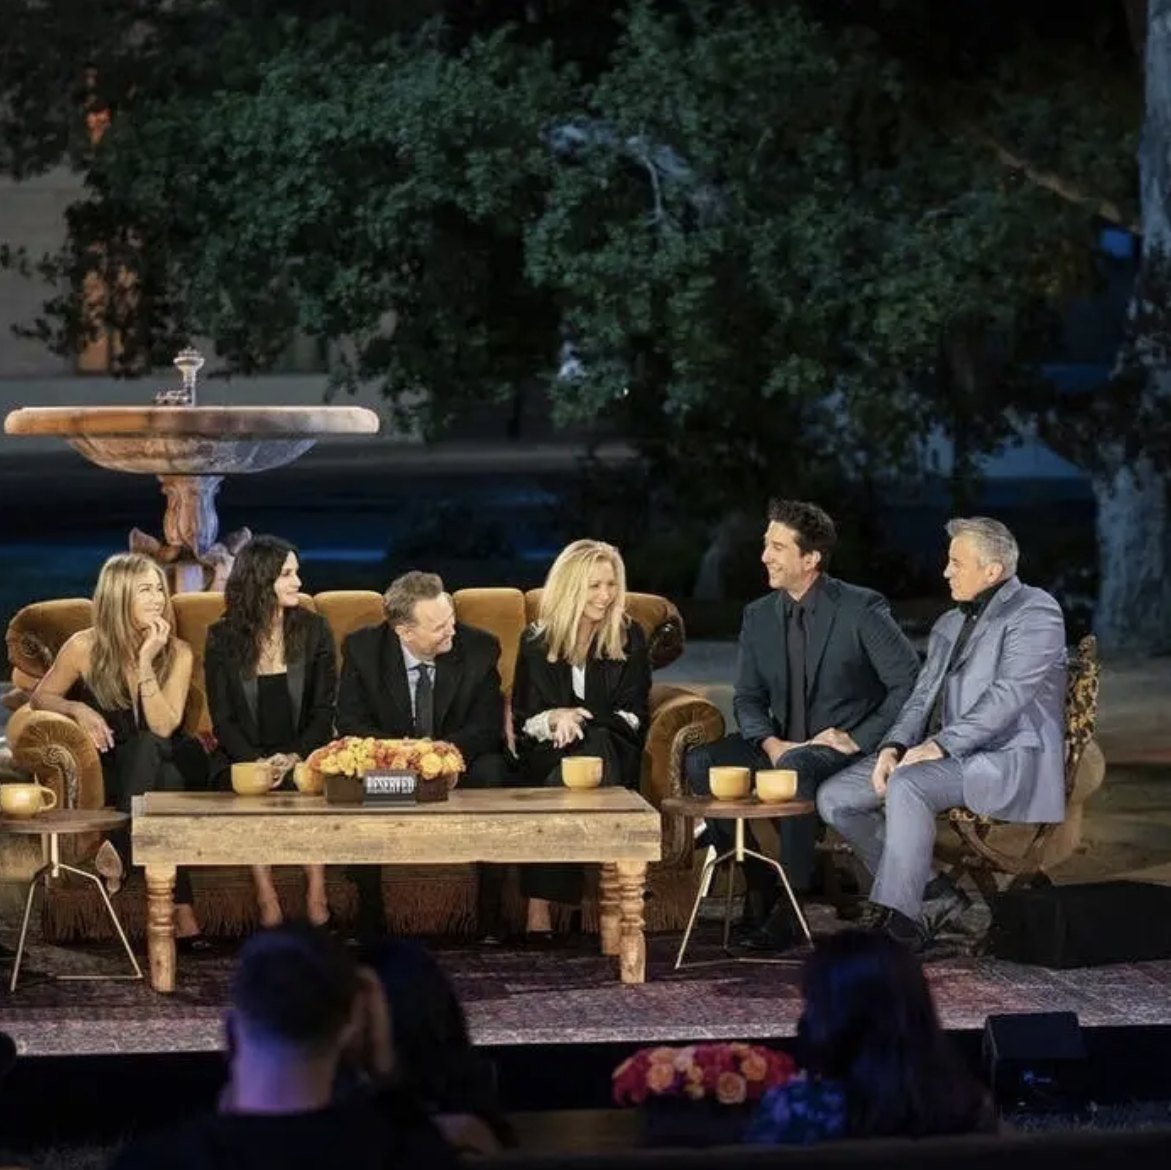 The cast of Friends sits on a stage together